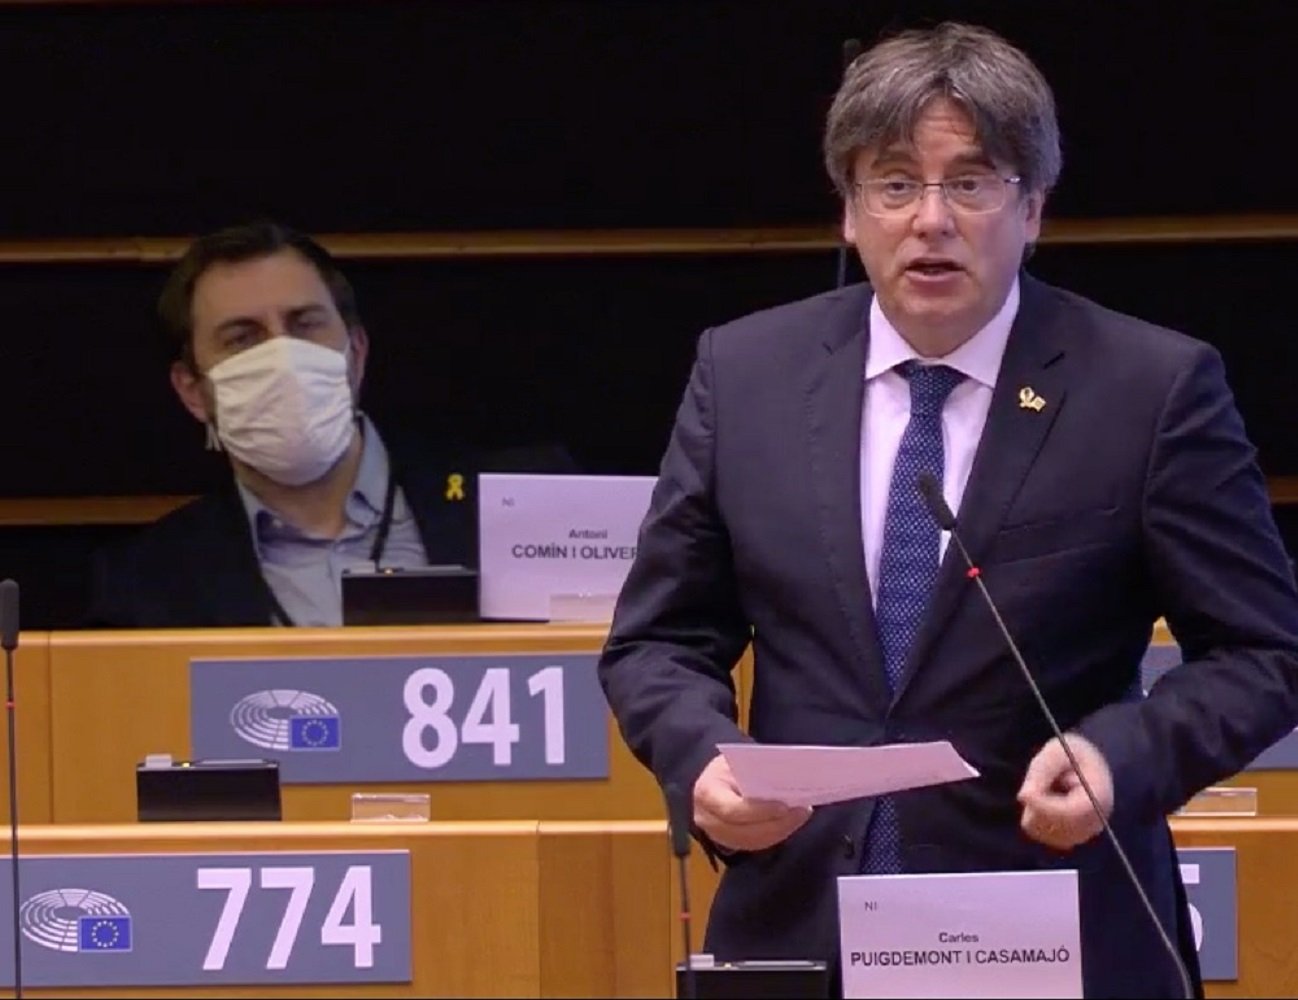 Puigdemont explains to minister why he won't hand himself over to Spain